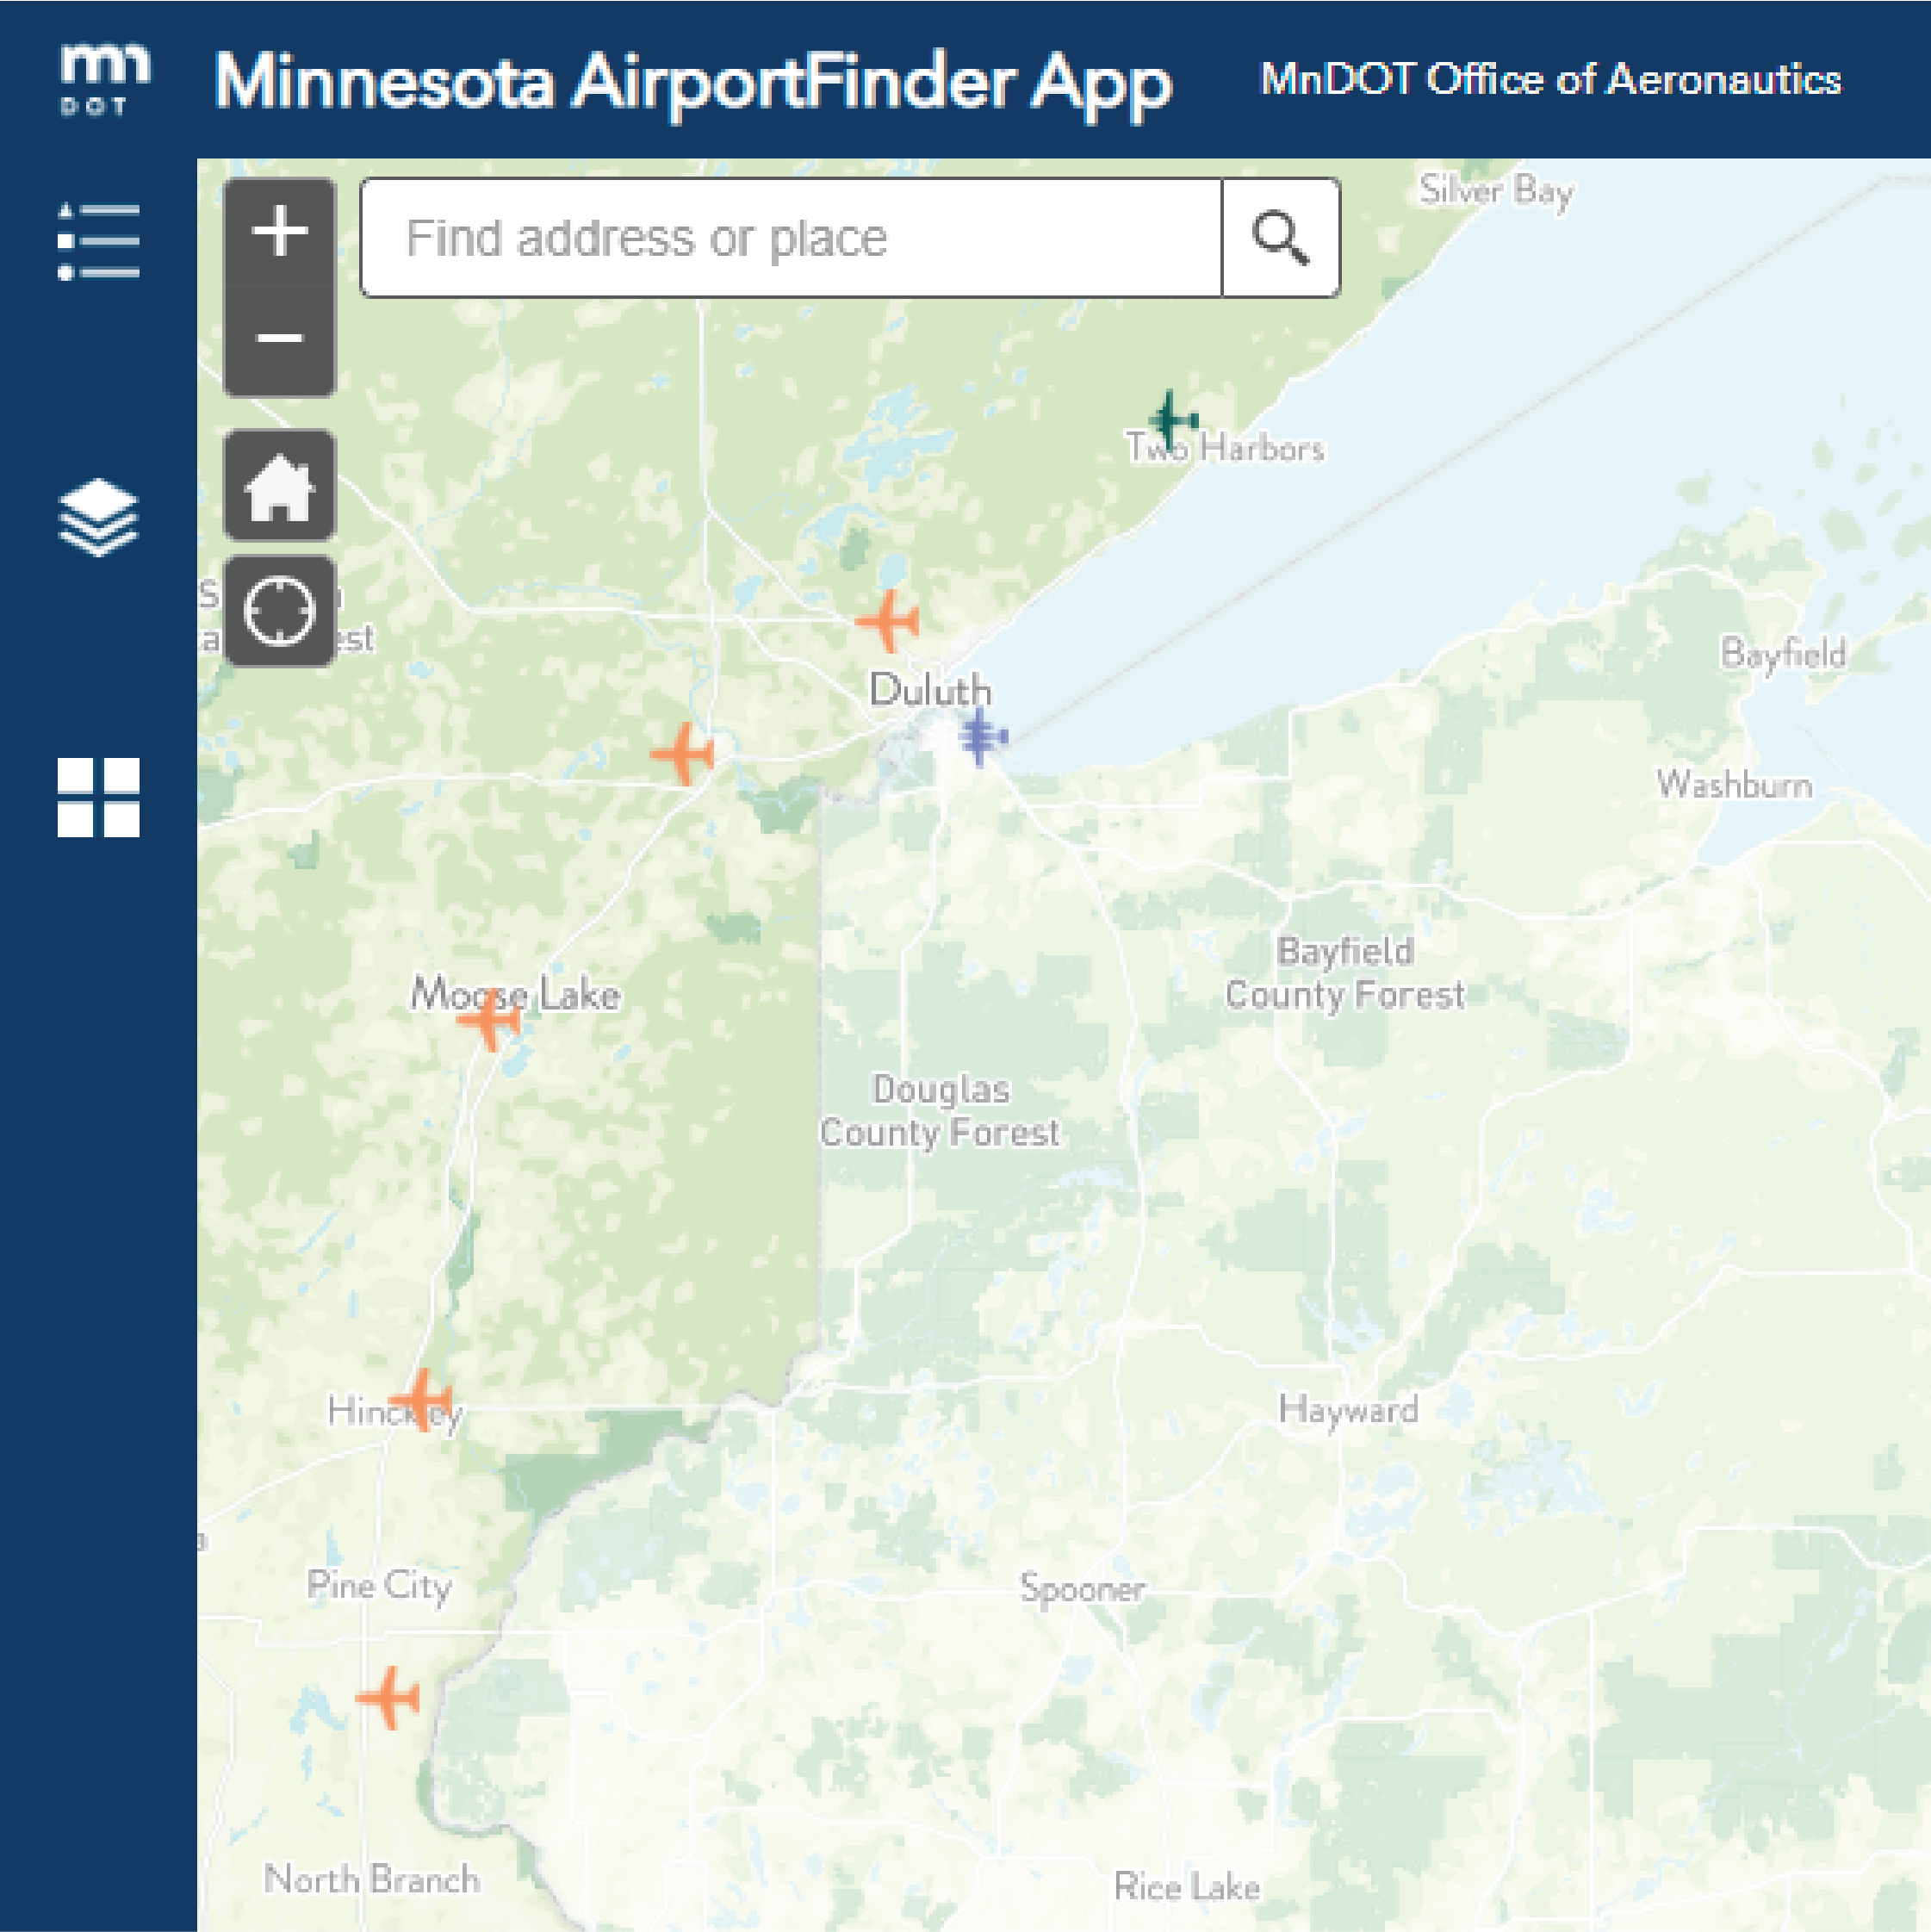 interactive map of Minnesota public airports